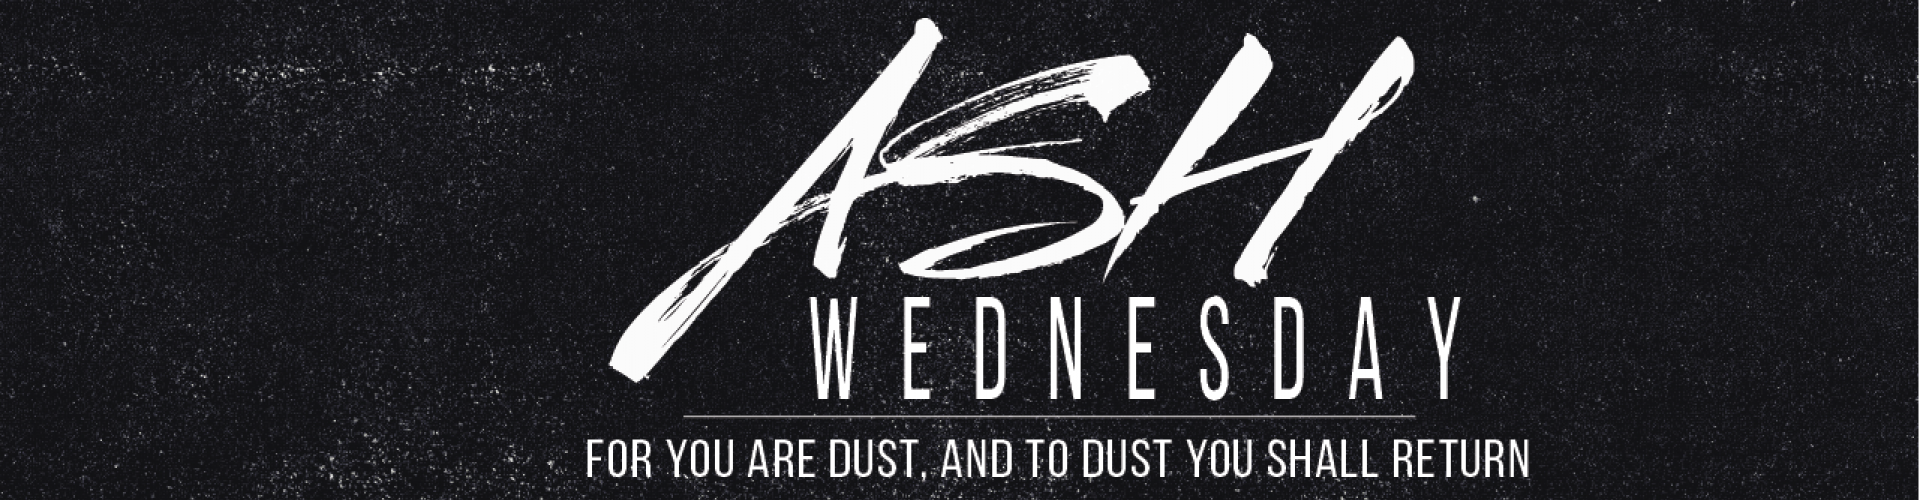 Black grunge background words say Ash Wednesday - for you are dust, and to dust you shall return